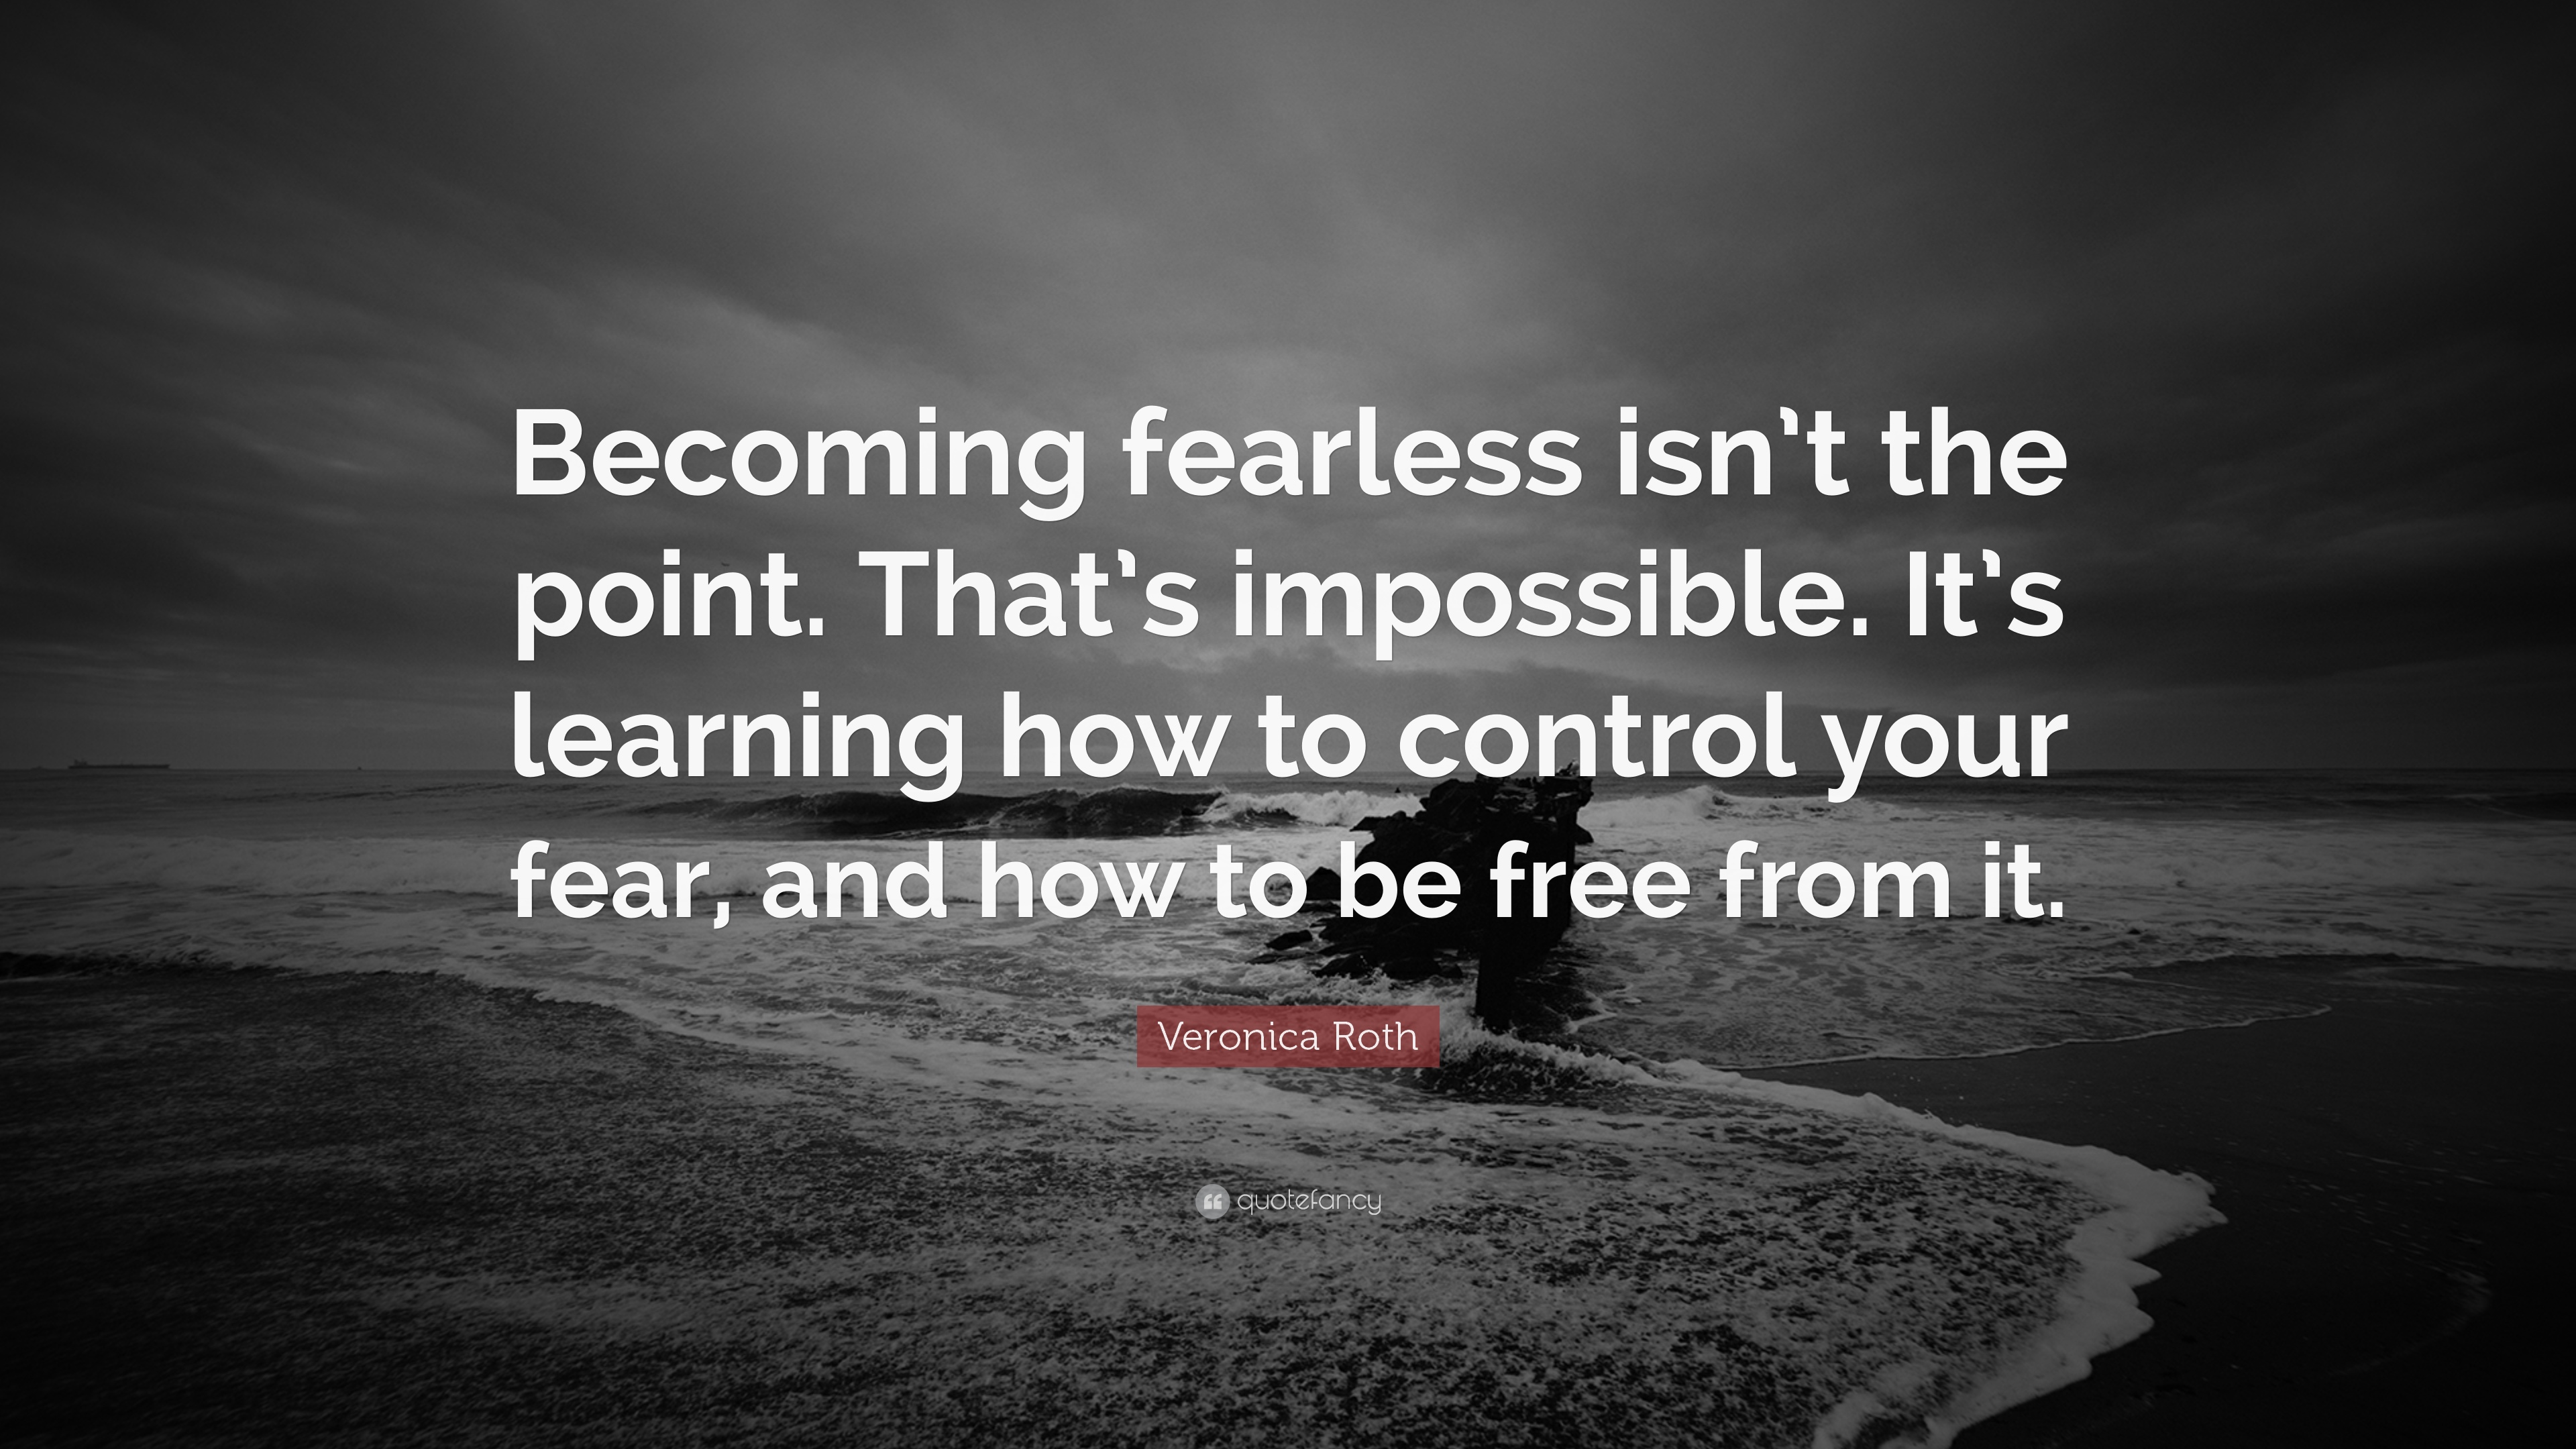 Veronica Roth Quote: “Becoming fearless isn't the point. That's ...